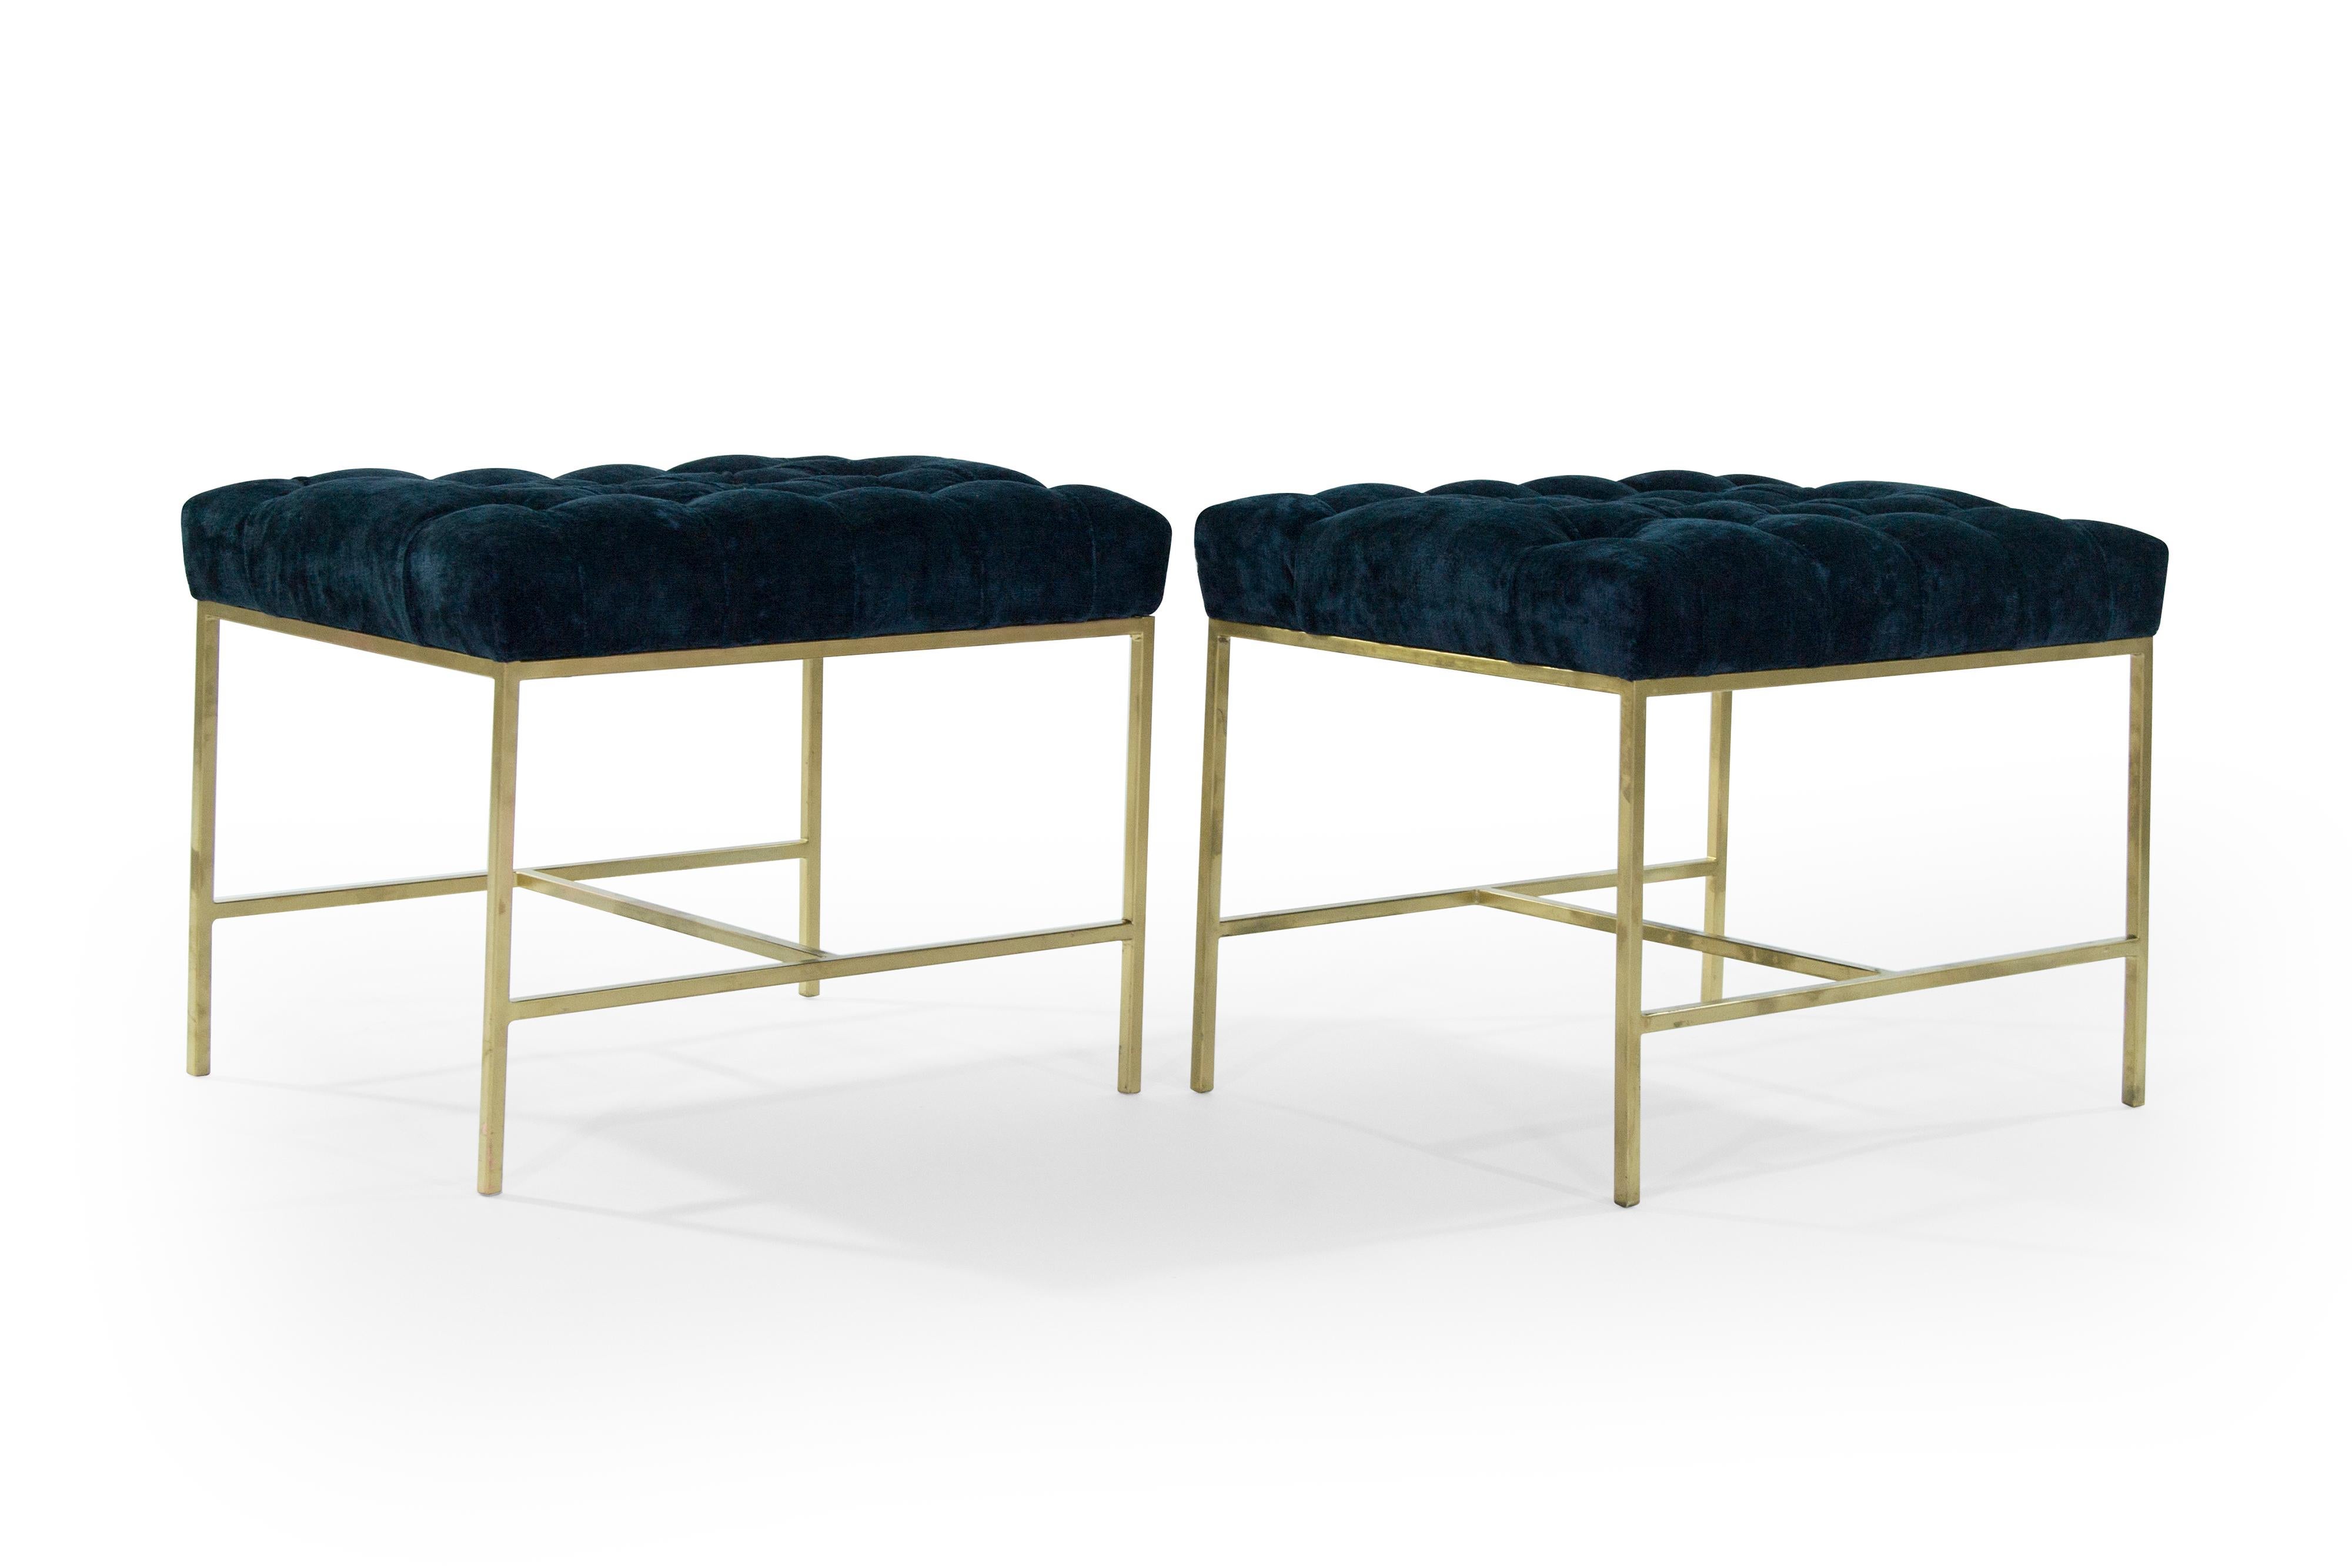 Pair of brushed brass stools or benches in the style of Paul McCobb, newly upholstered in navy chenille with tufted detail, circa 1950s.